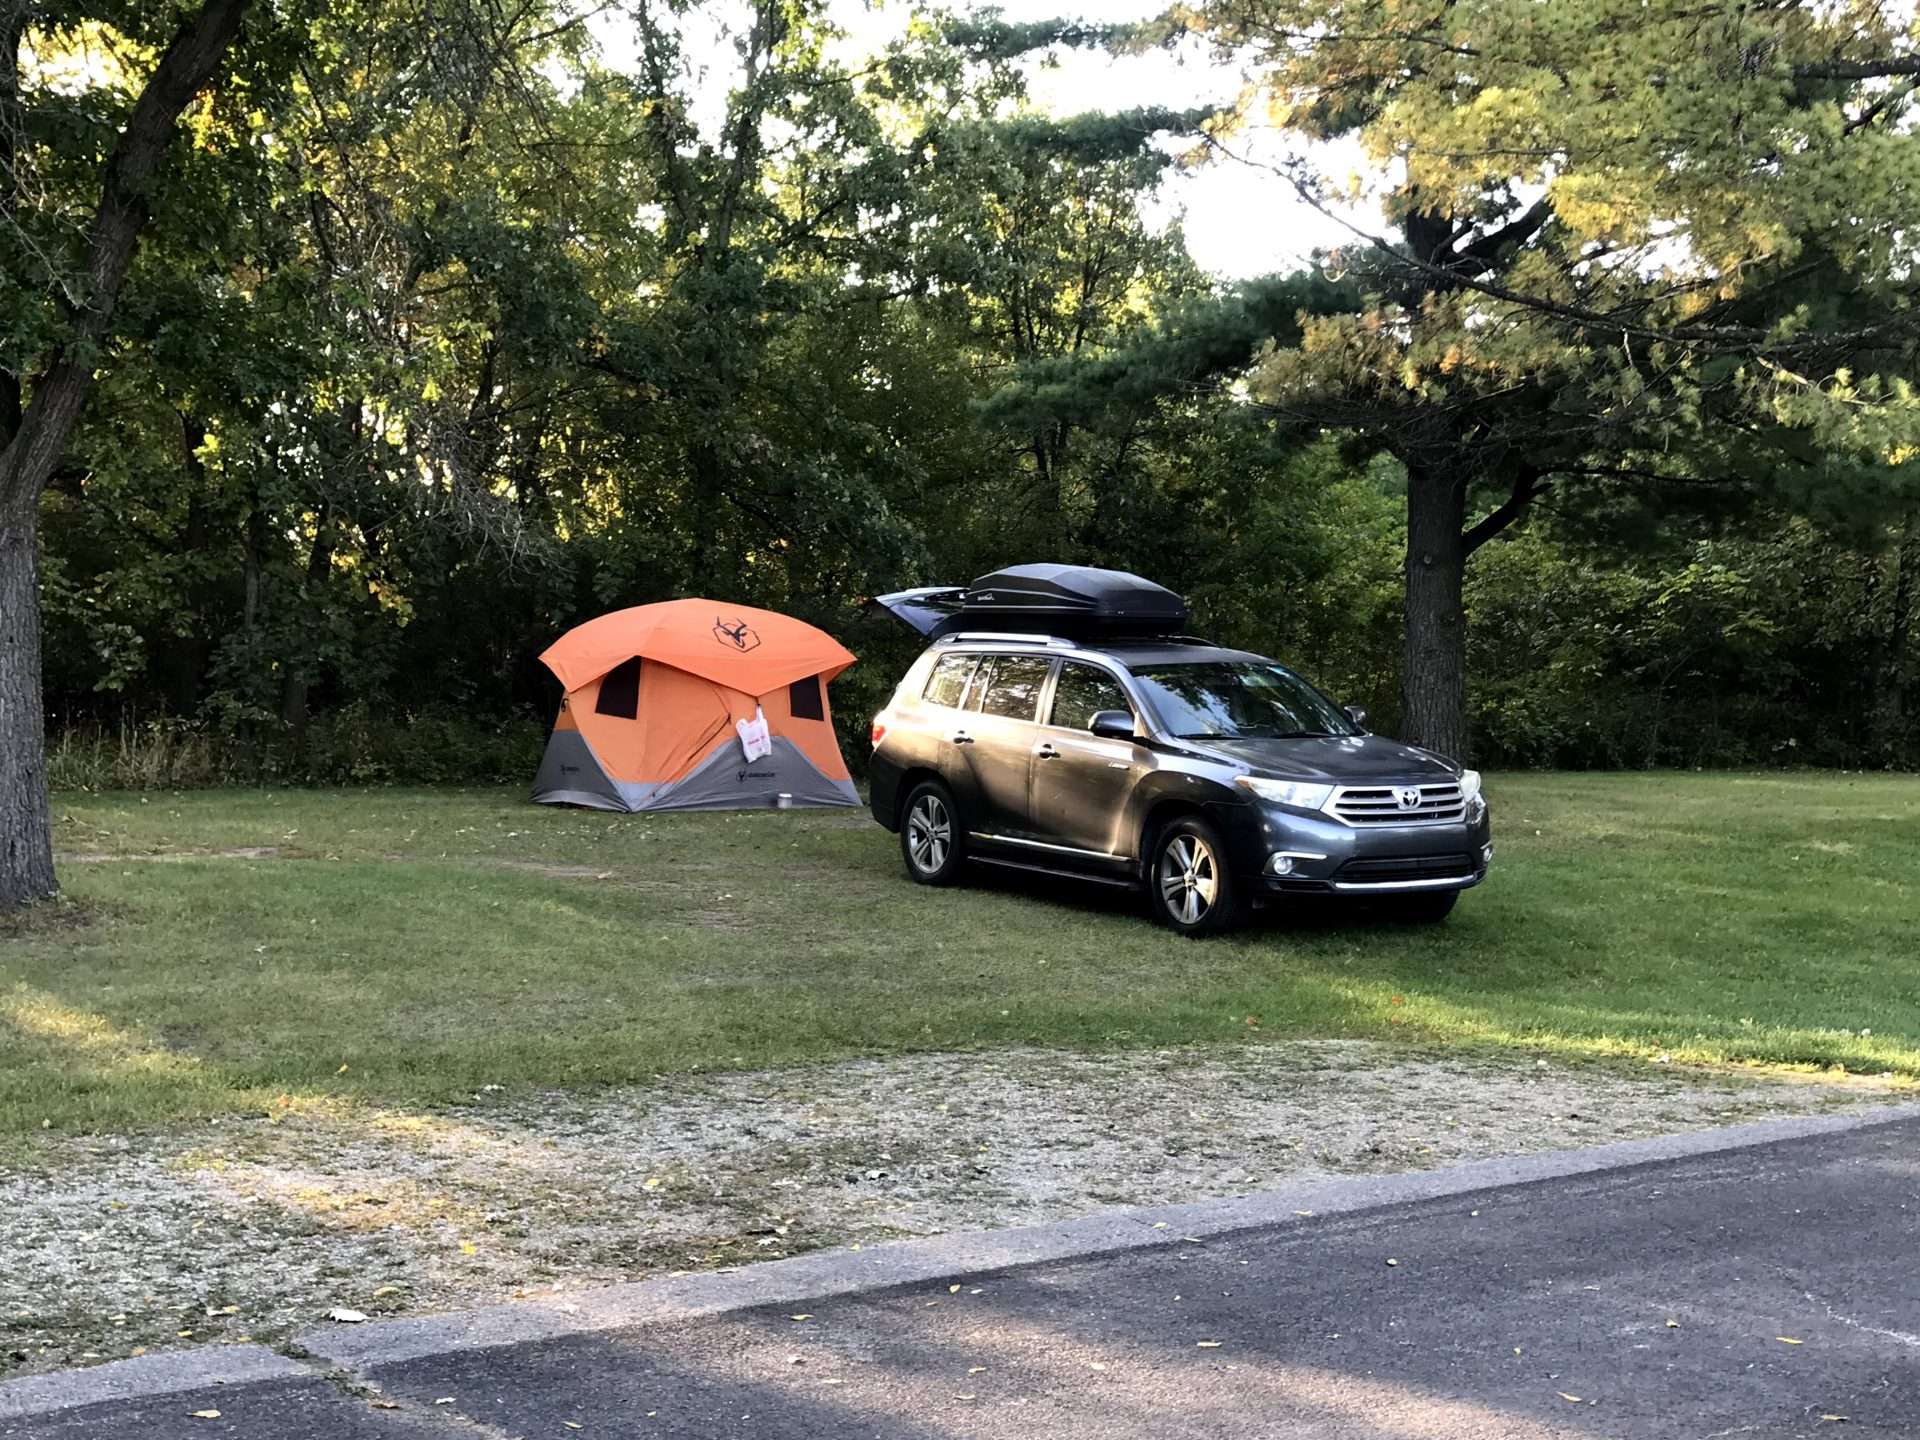 Tent and SUV set up at campsite.